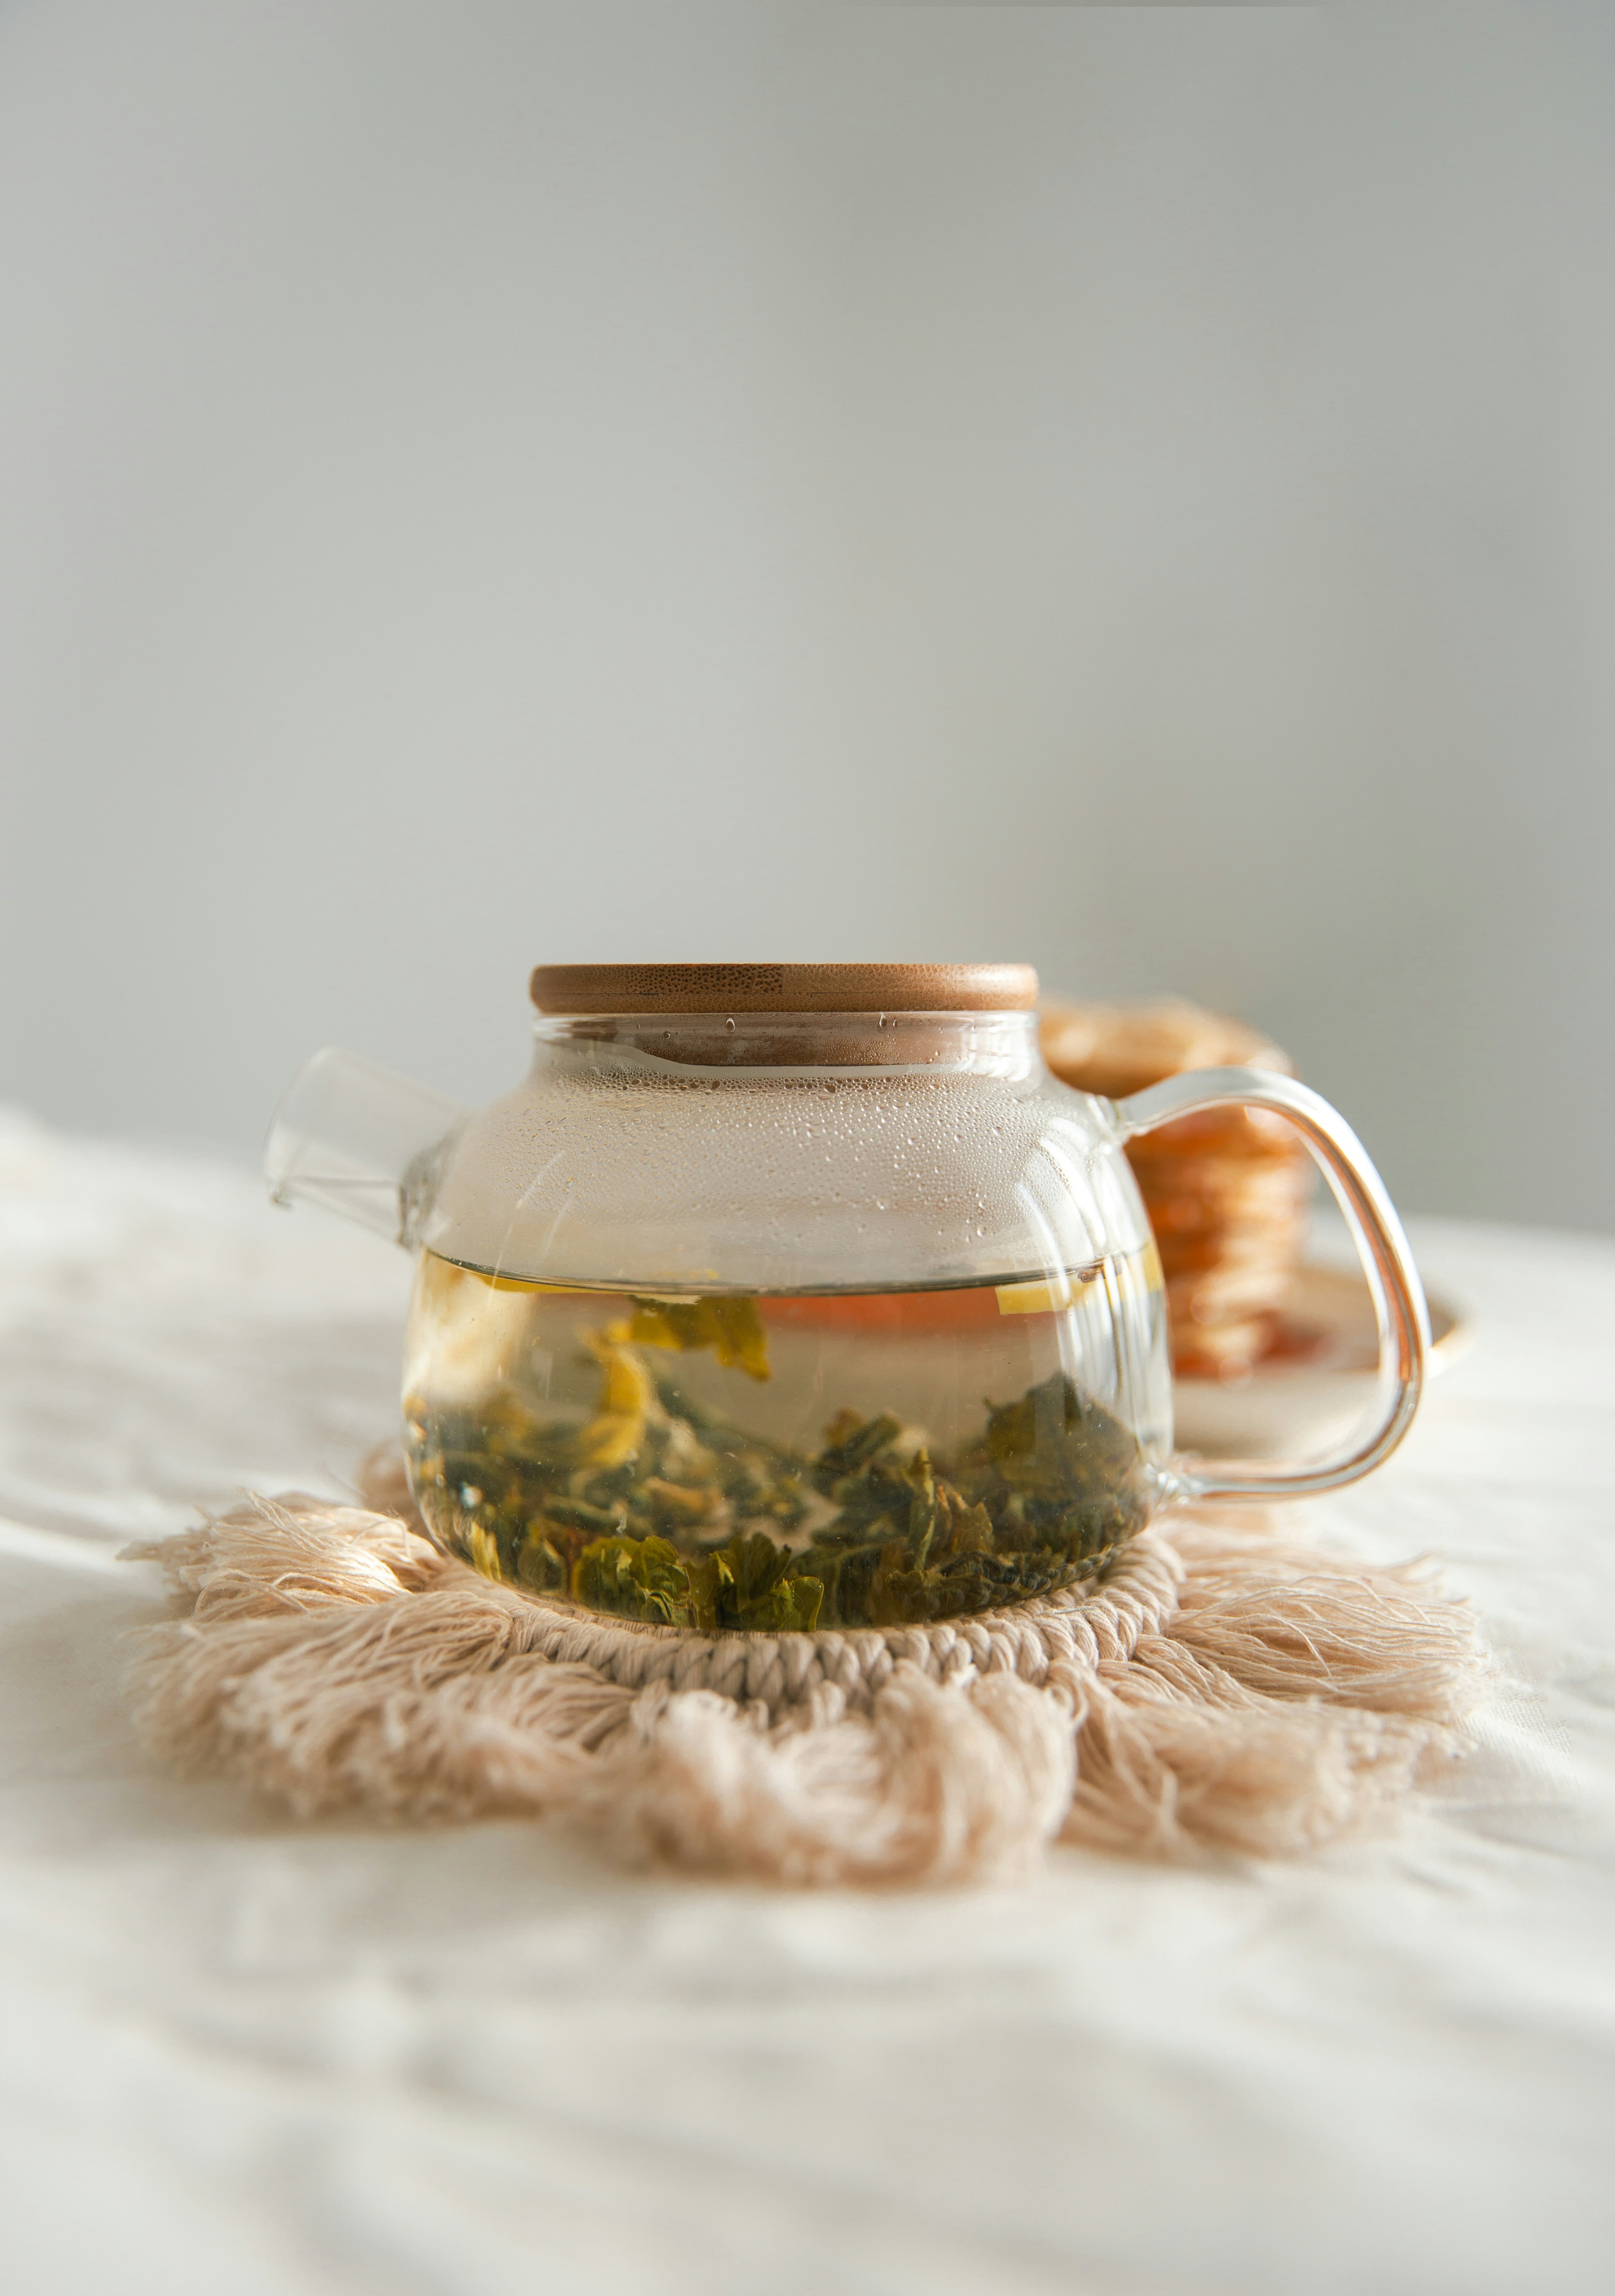 Is Green Tea Beneficial For Promoting Hair Health And Preventing Hair Loss?